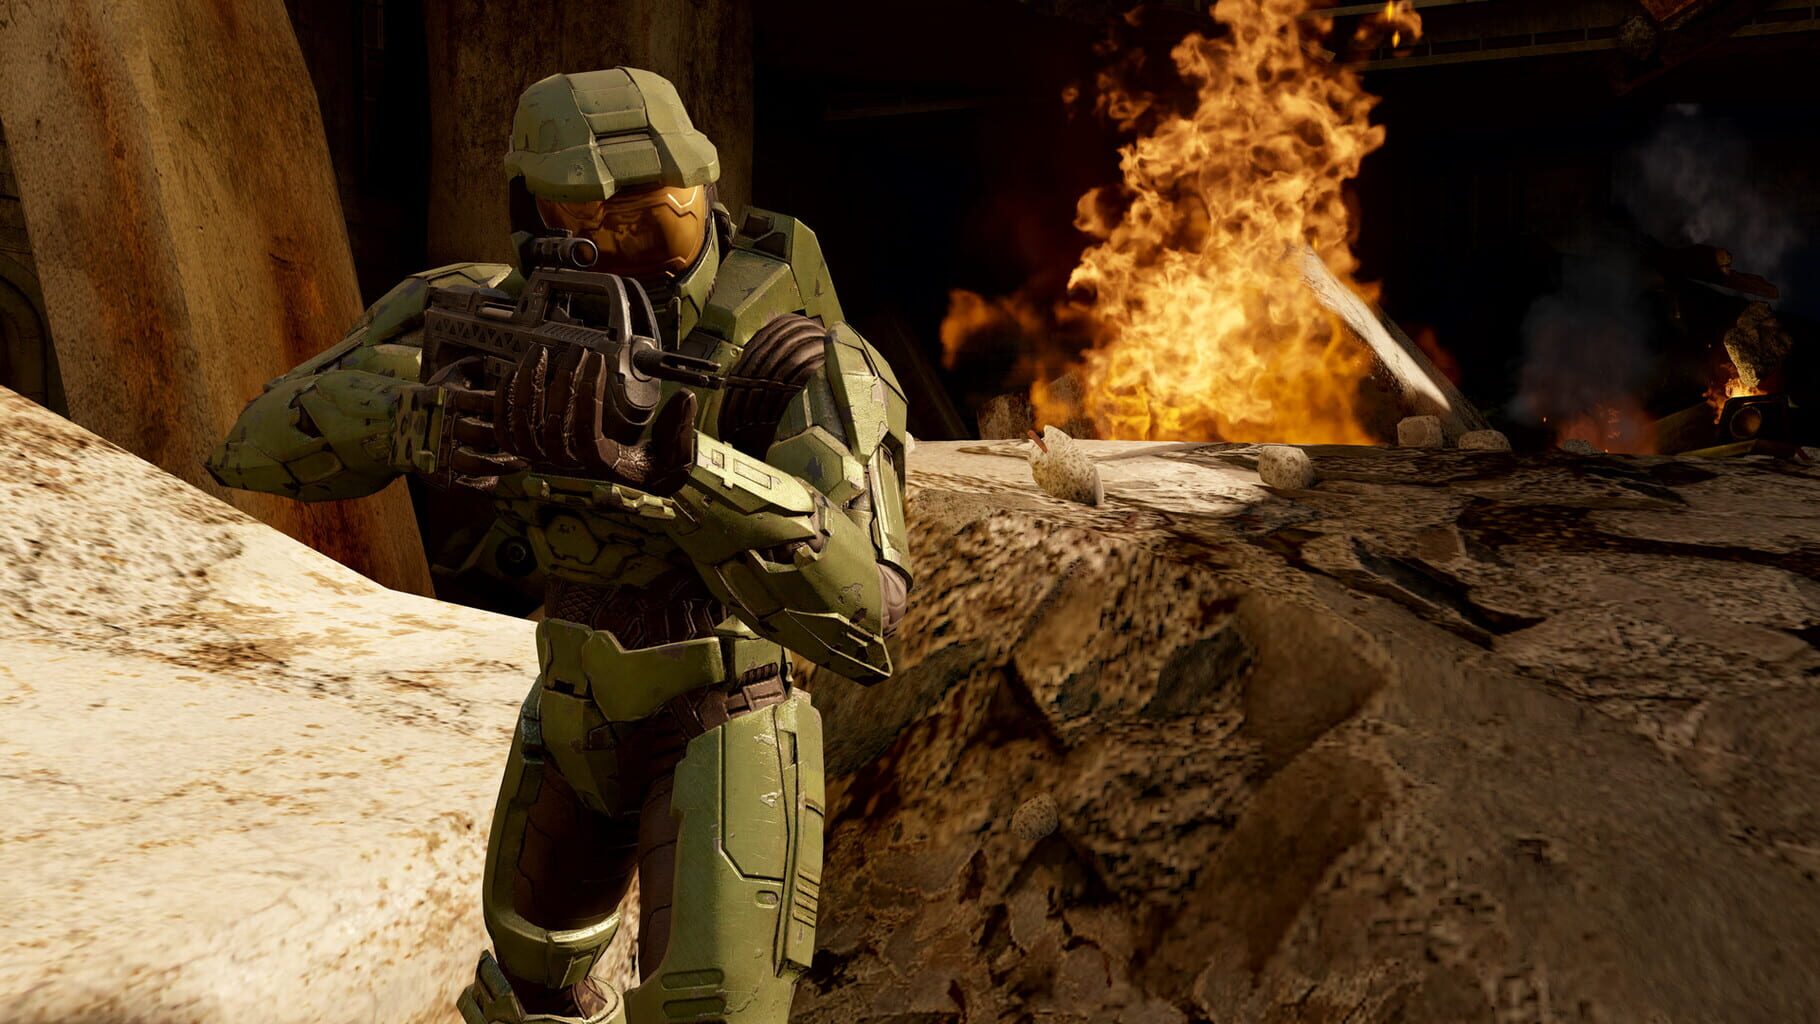 Halo: The Master Chief Collection screenshots